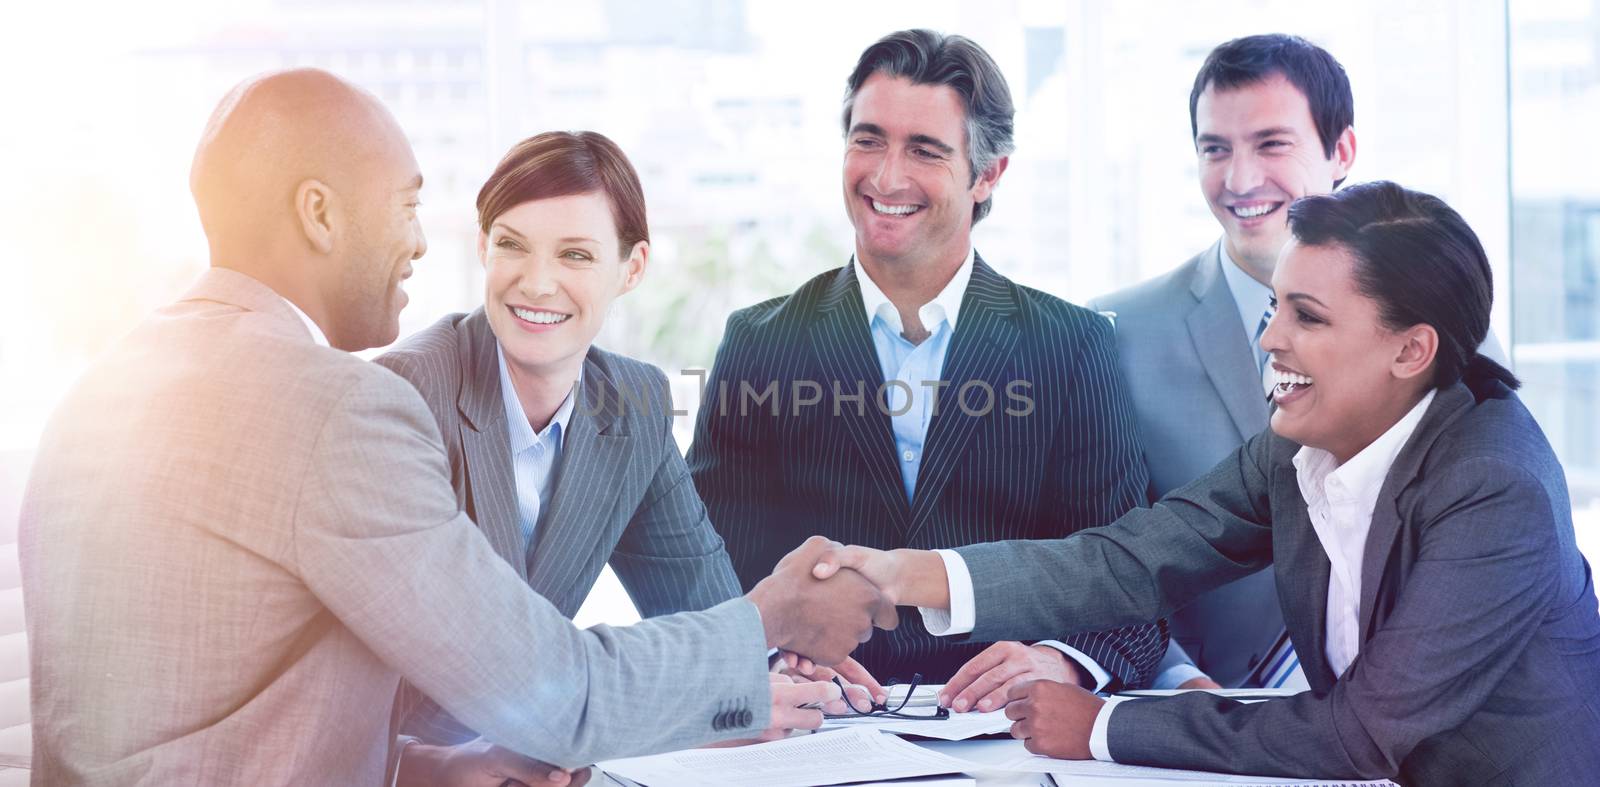 Business people greeting each other in a meeting